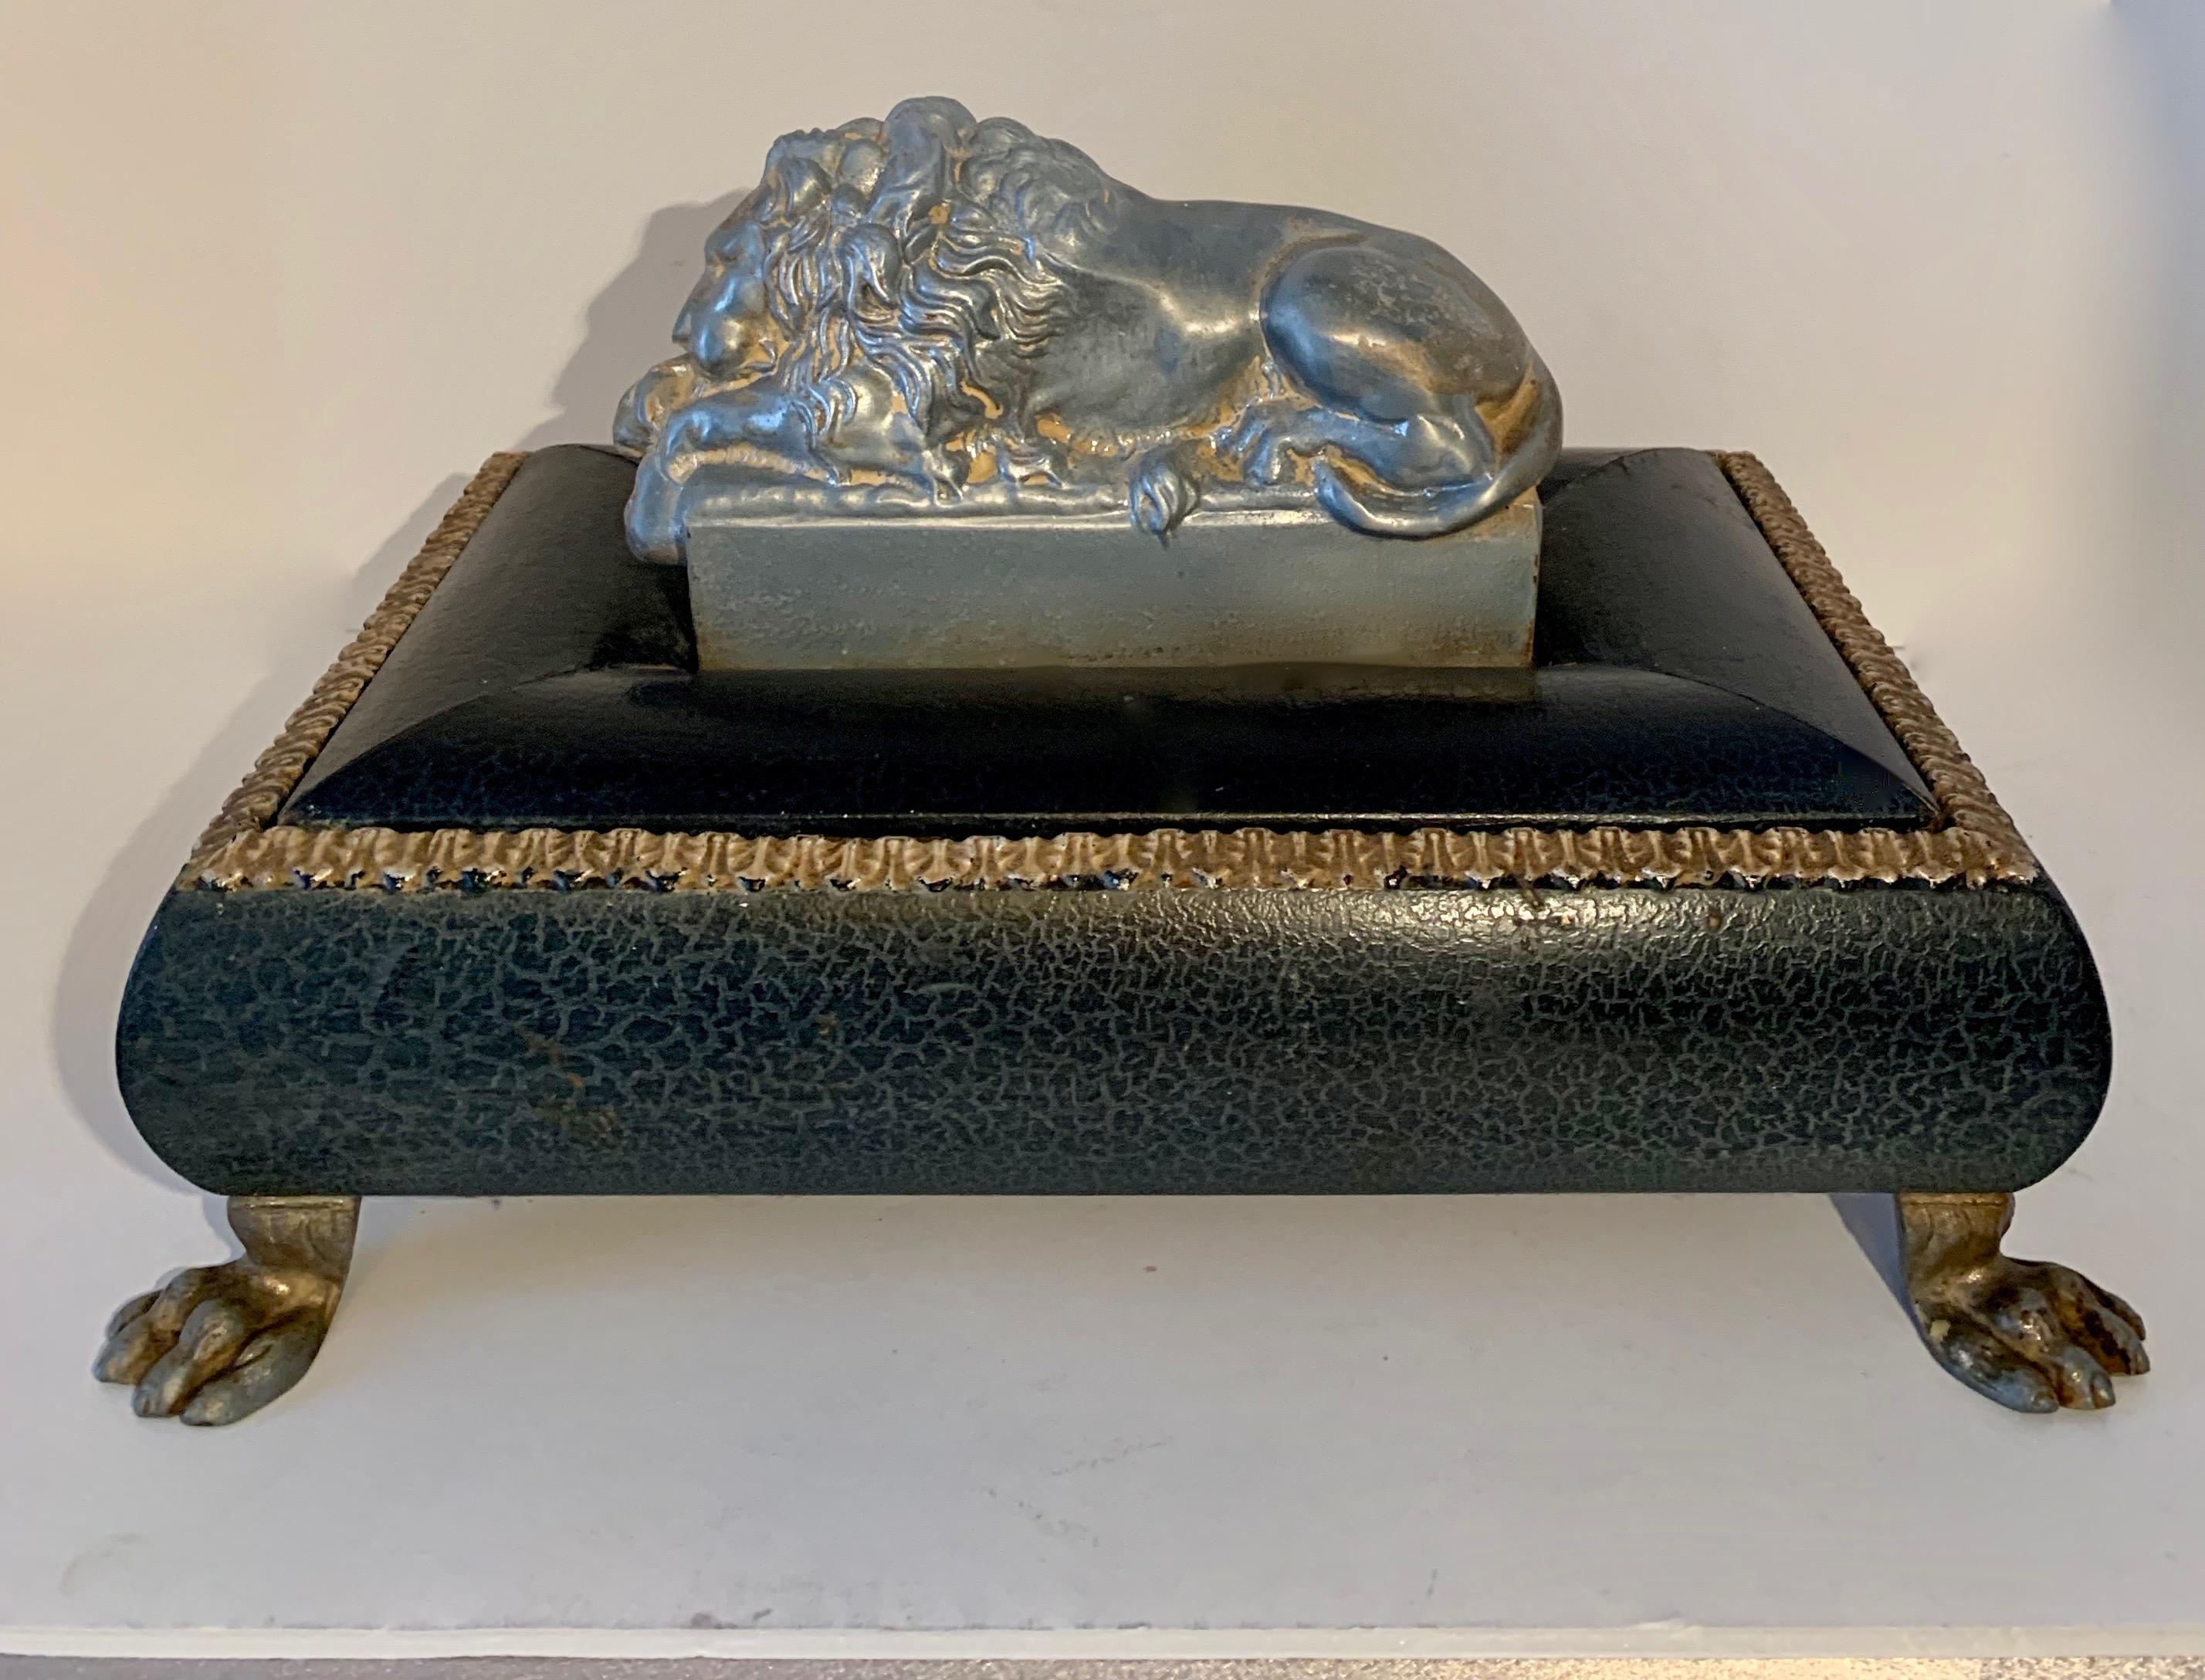 A unique letter box. A handsome box with reclining lion resting atop, used to open the box. The four Lion Feet are wonderful for the box to rest on. Store your important letters, nick-knacks, favorite recipes, jewelry, or perhaps your 420 supplies!